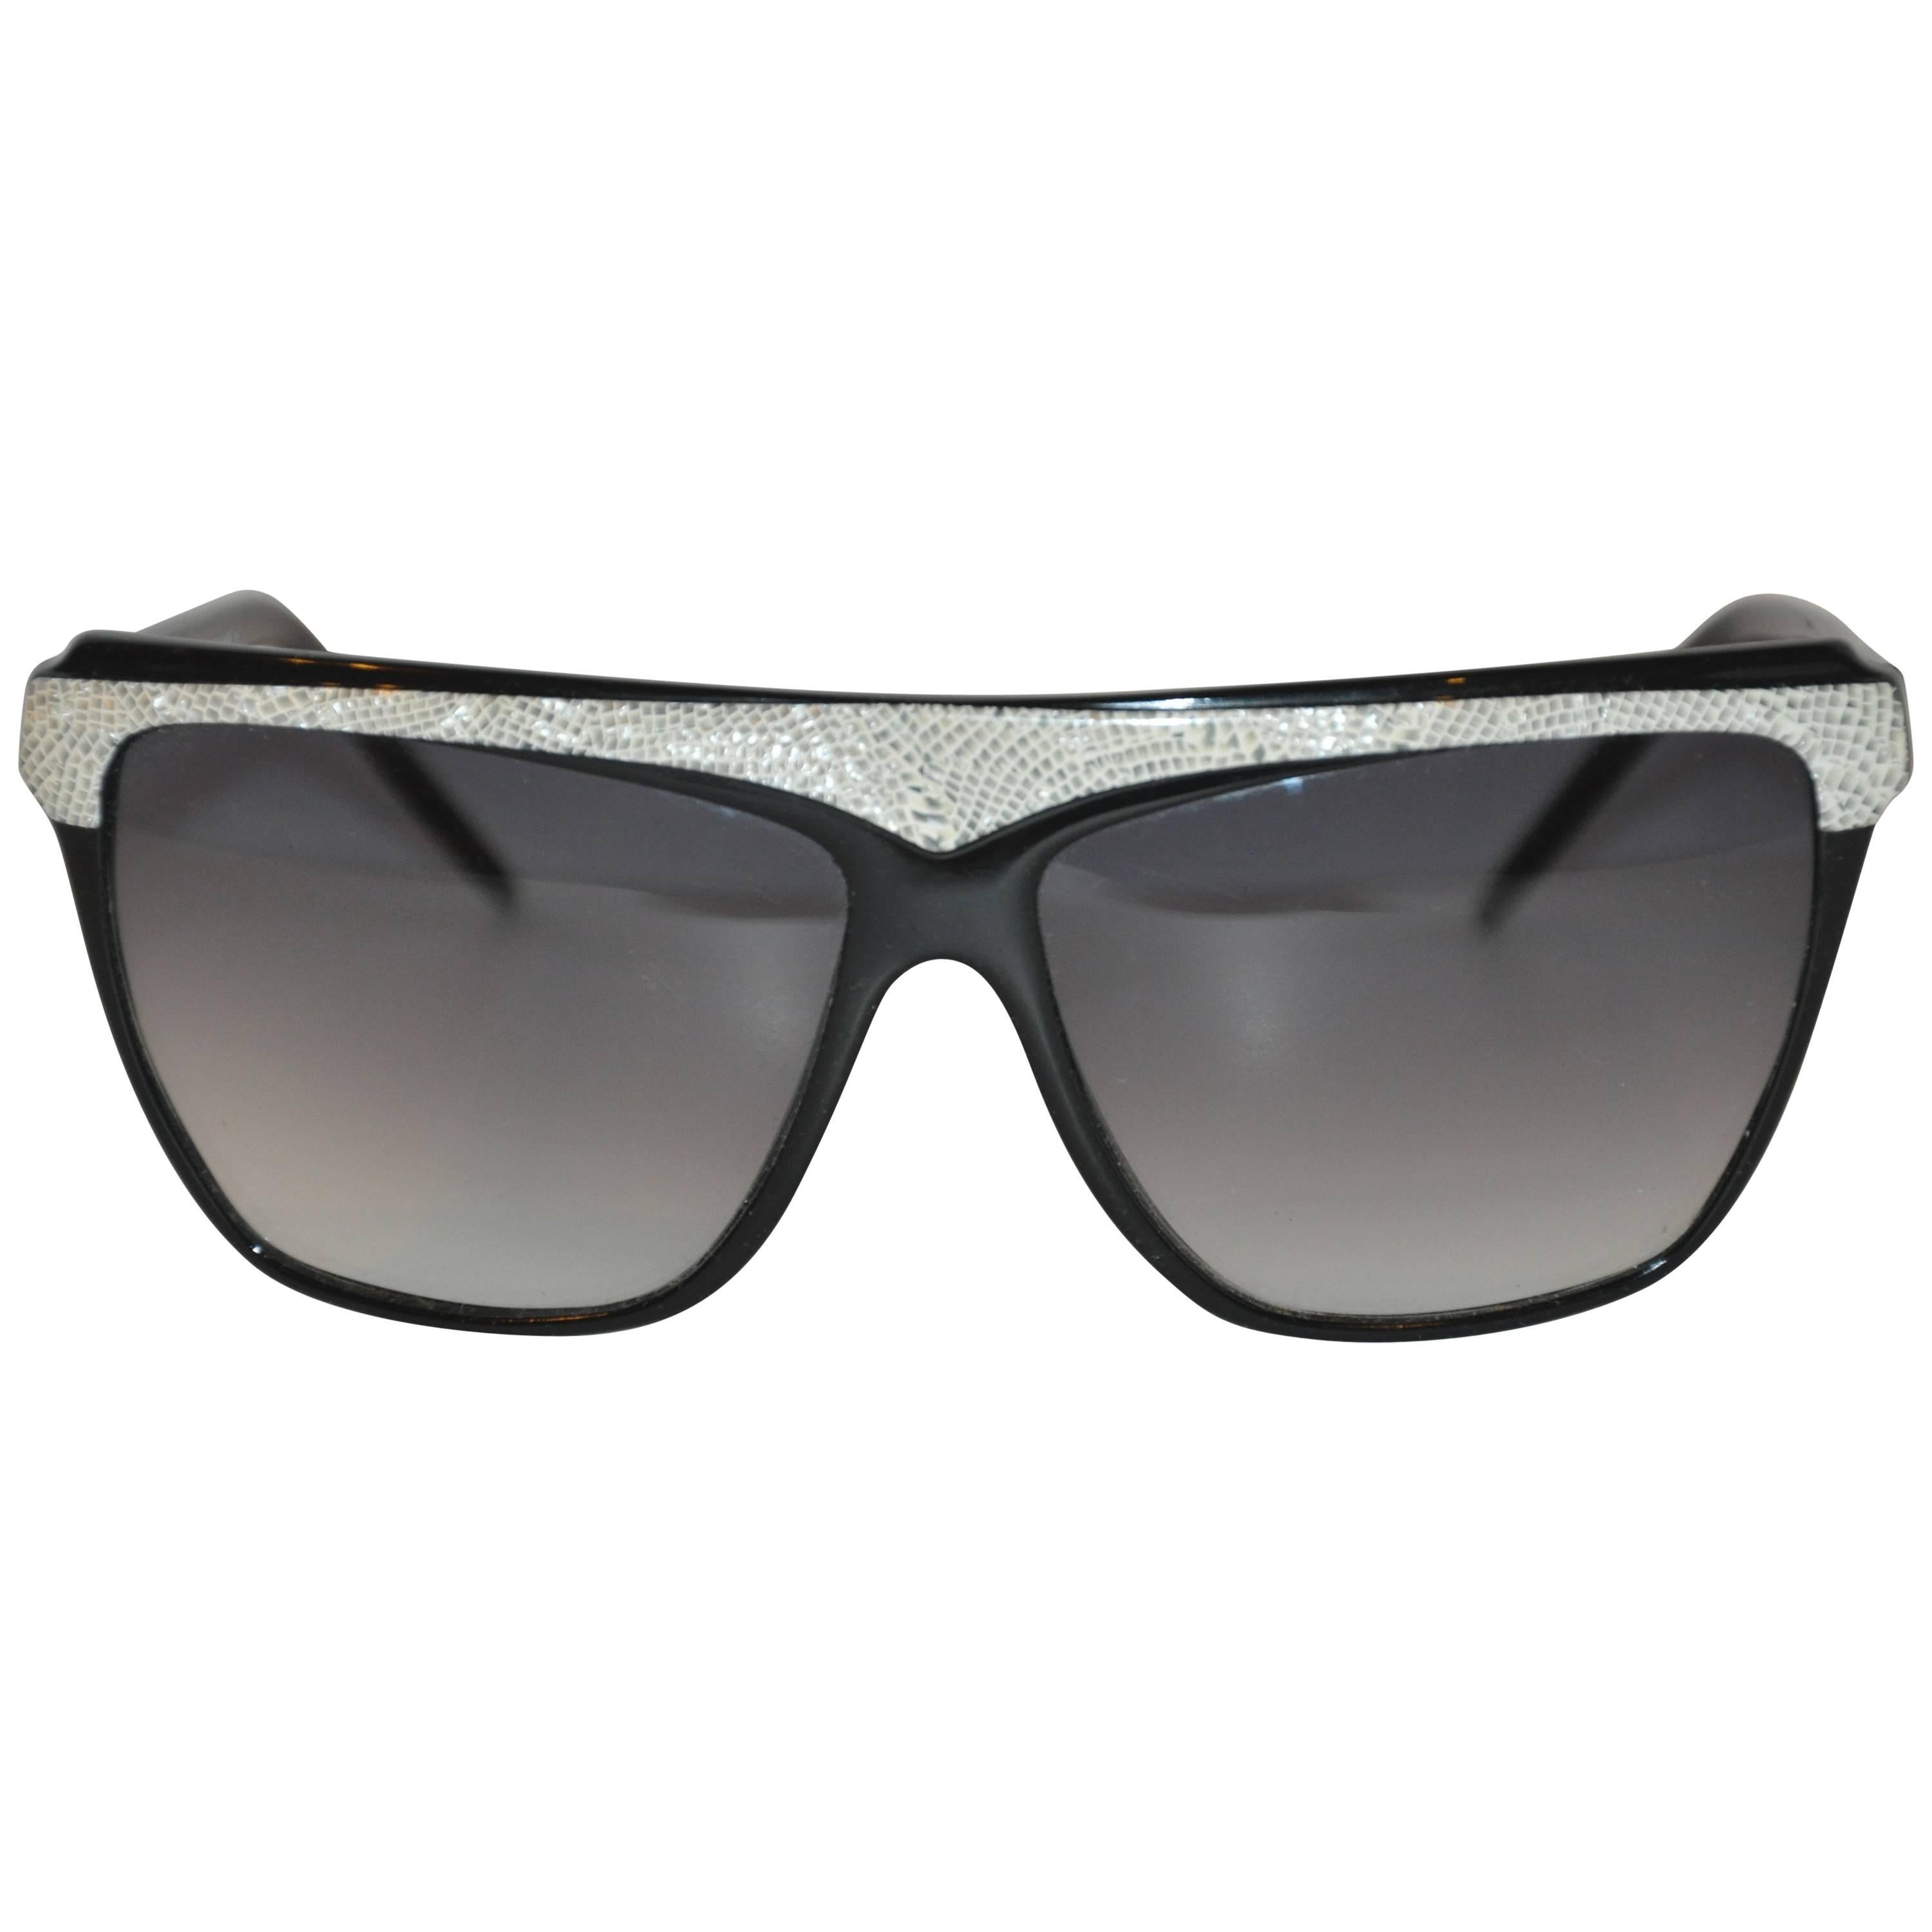 Laura Biagiotti Black Lucid with Gray & Cream "Snake" Lucid Sunglasses For Sale